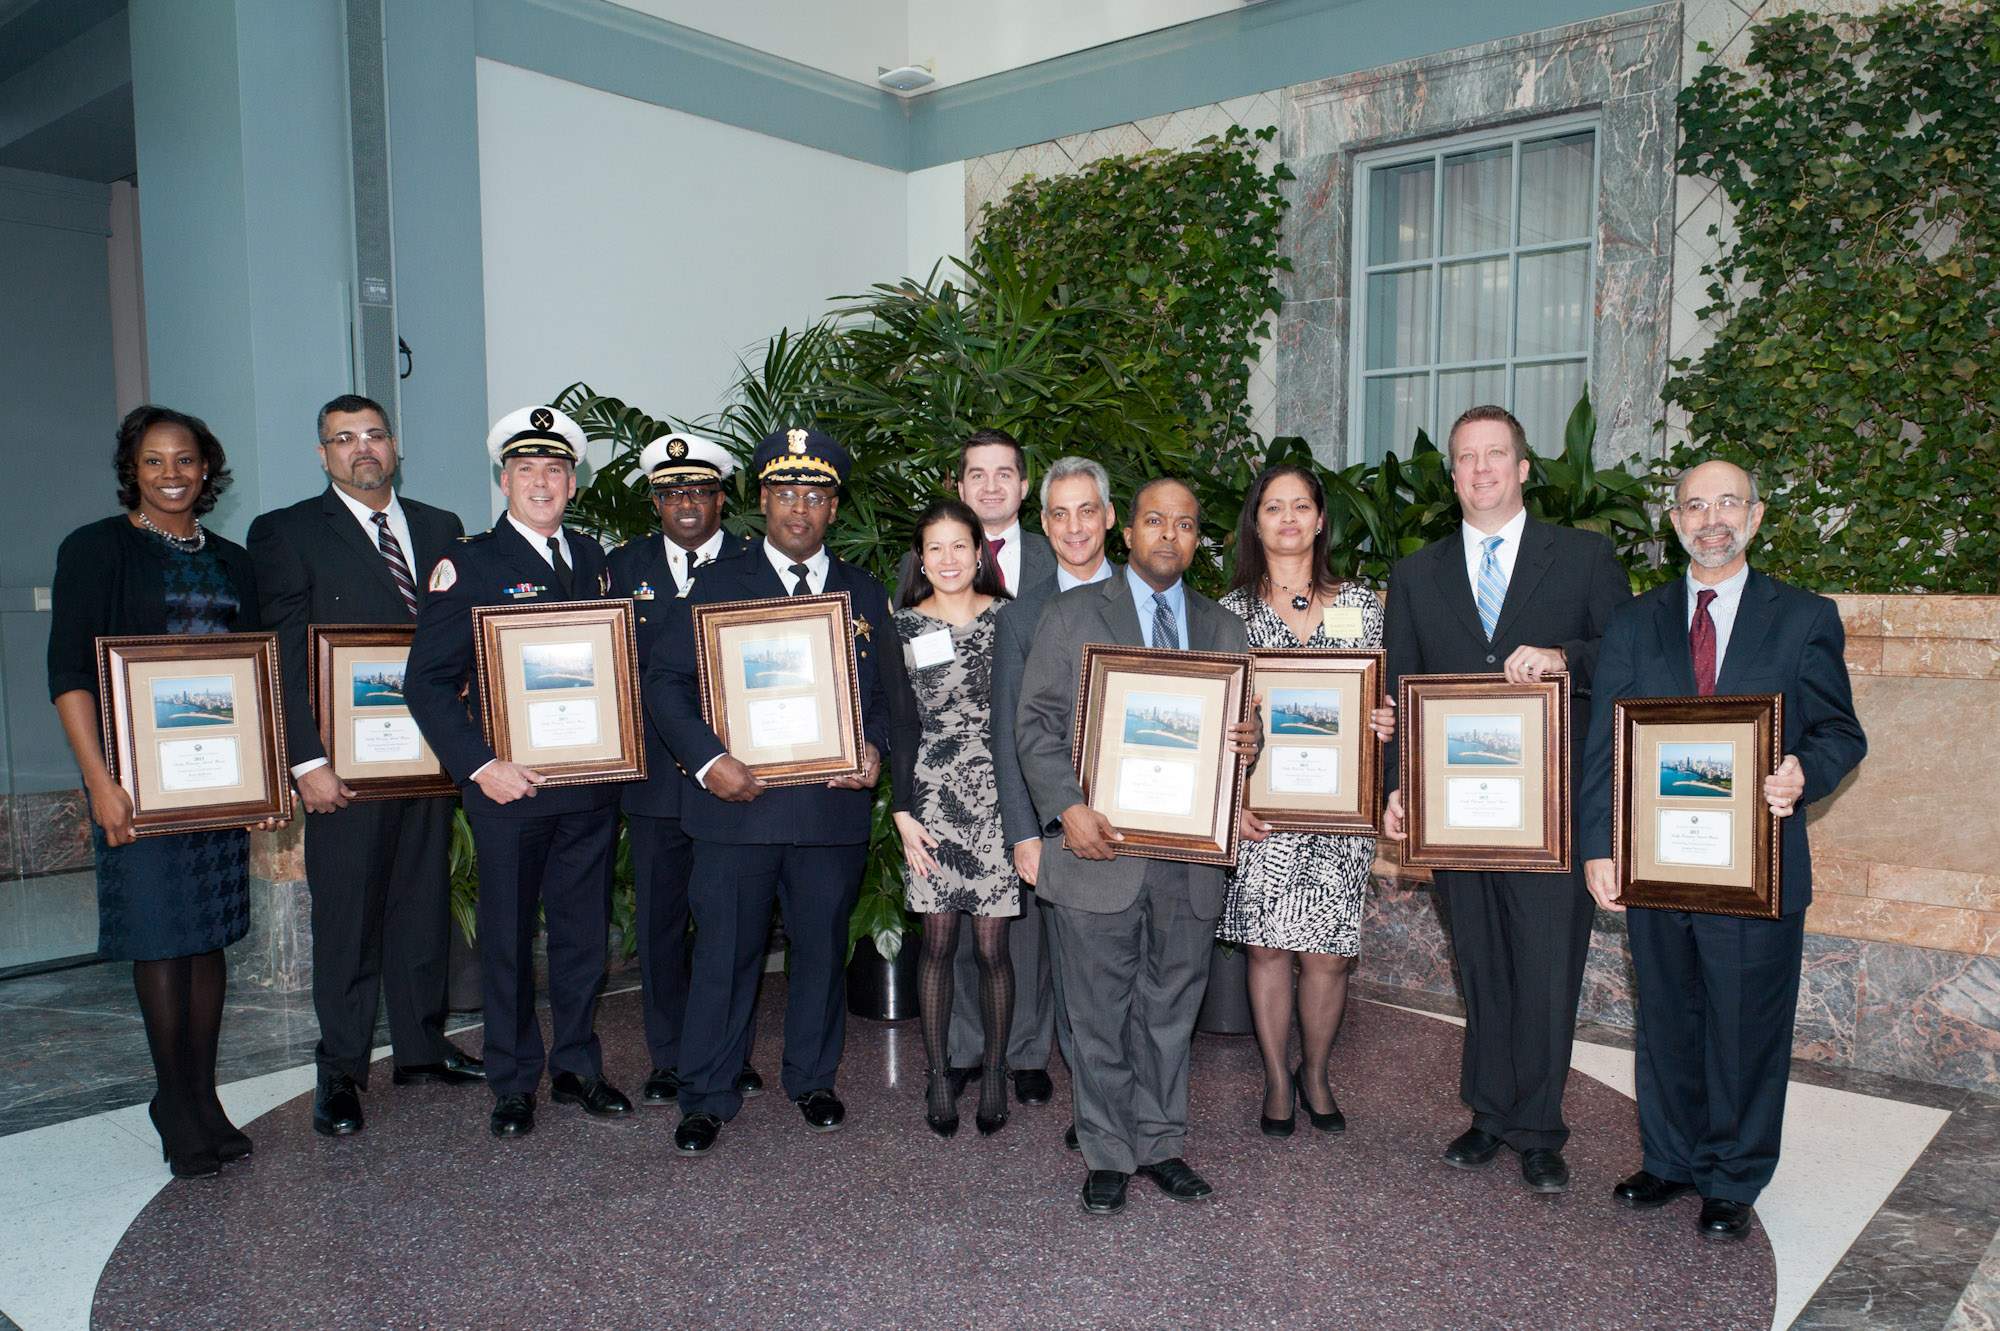 Mayor Rahm Emanuel, Department of Human Resources Commissioner Soo Choi, and John Kedzierski, Director, Motorola Solutions with the 2013 Kathy Osterman Award Recipients.